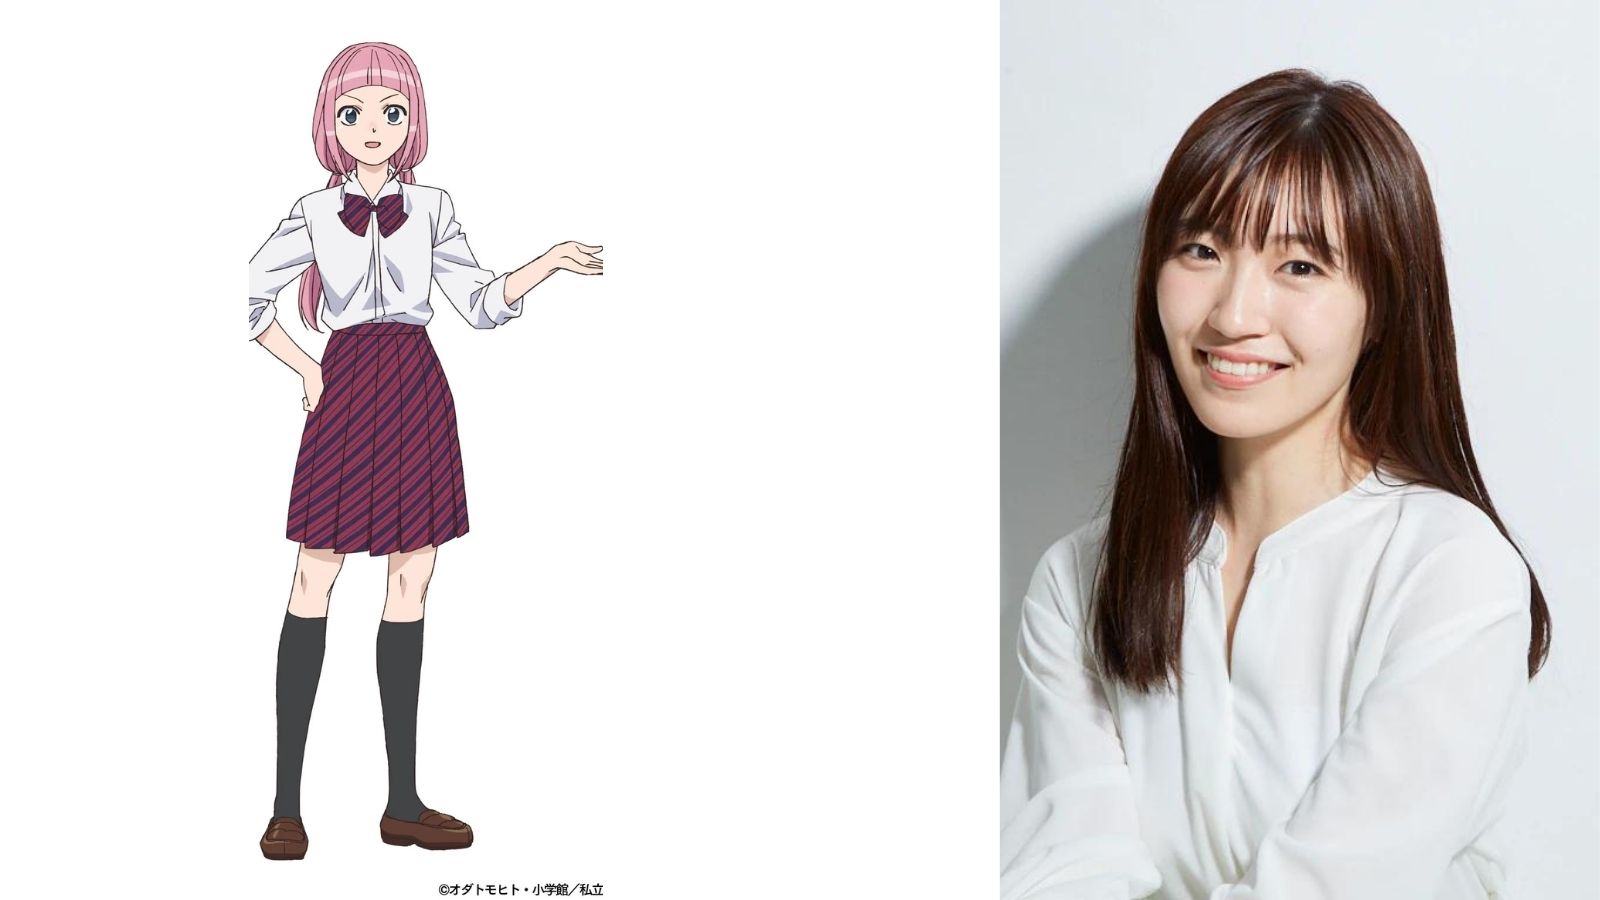 Additional Cast Announced For Komi Can't Communicate Anime